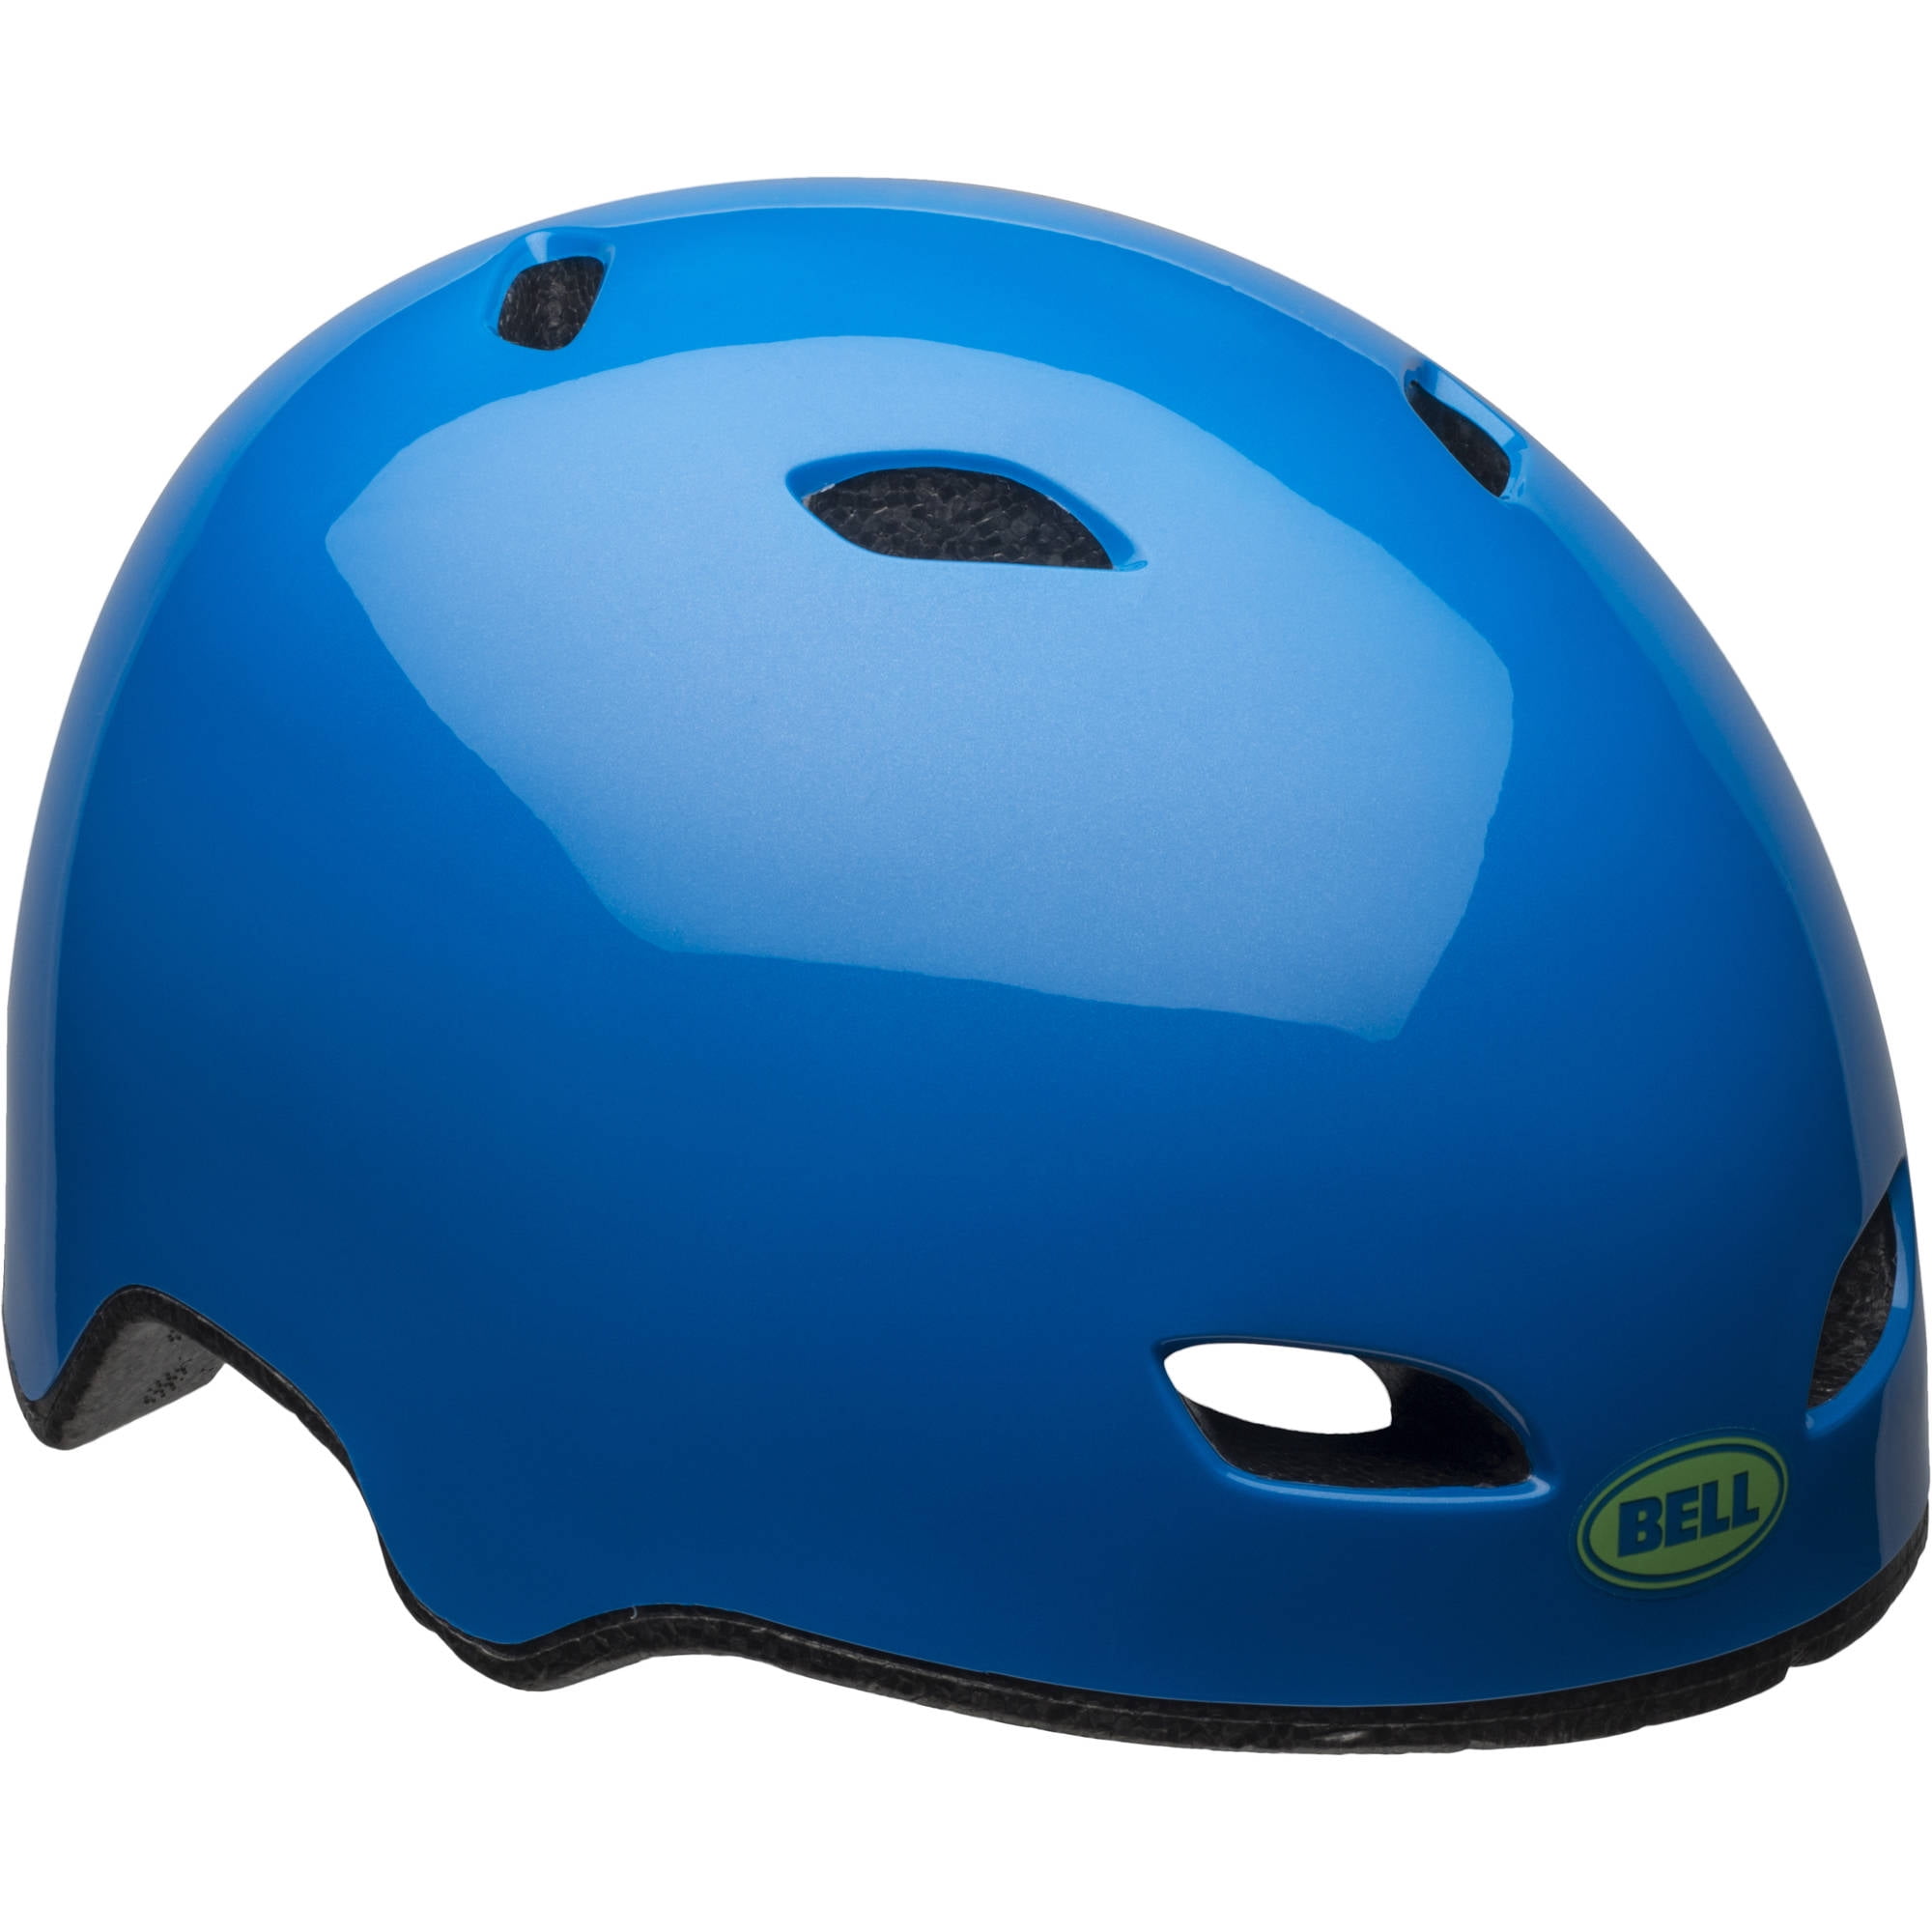 Details about   Bell PSYCHO MULTI-SPORT Youth Helmet**Psycho Blue**FREE SHIPPING 